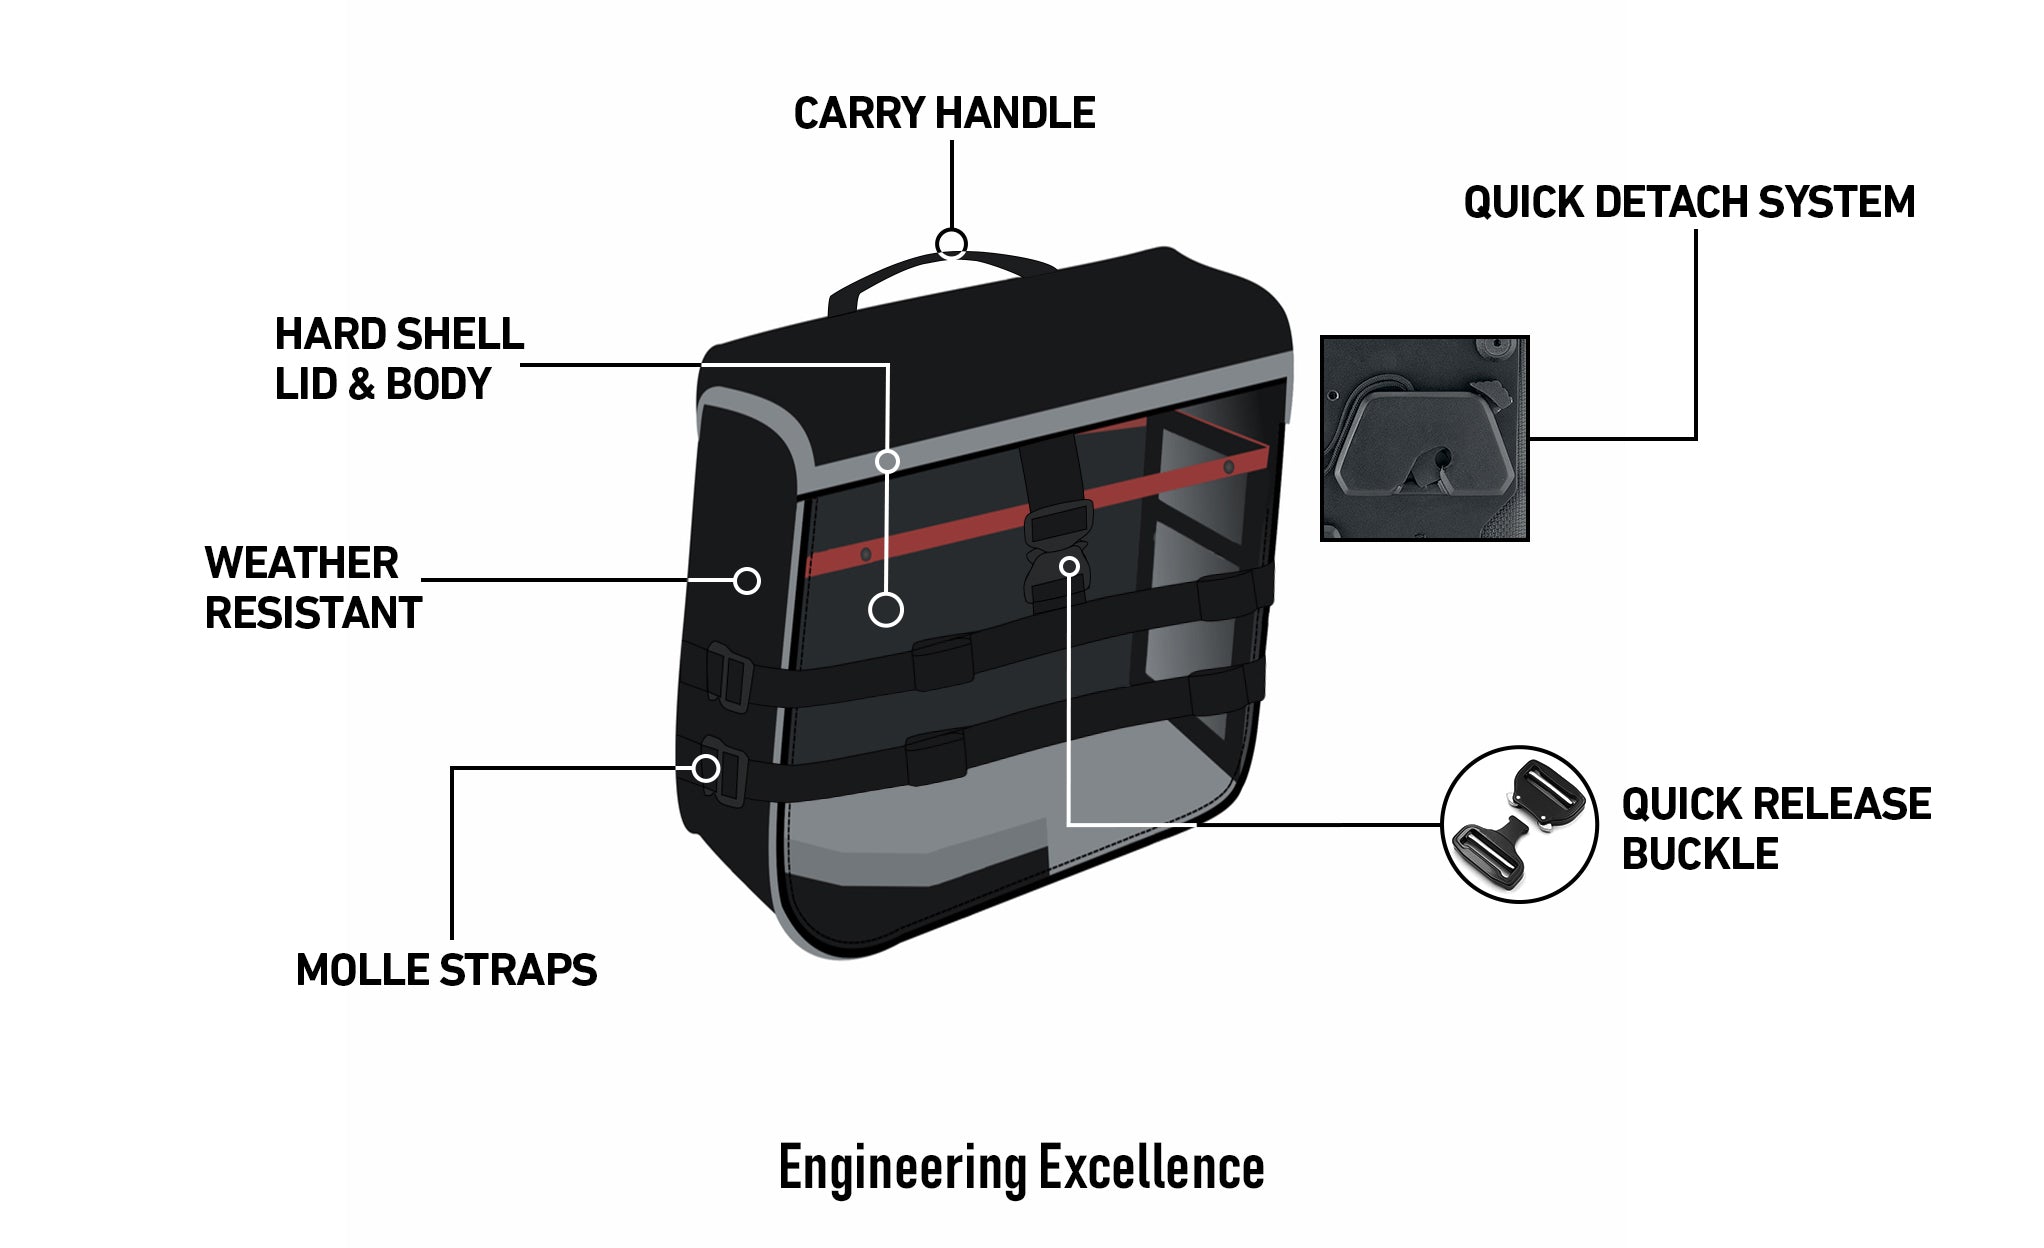 Viking Incognito Detachable Small Solo Motorcycle Saddlebag For Harley Sportster Seventy Two Xl1200V Engineering Excellence with Bag on Bike @expand